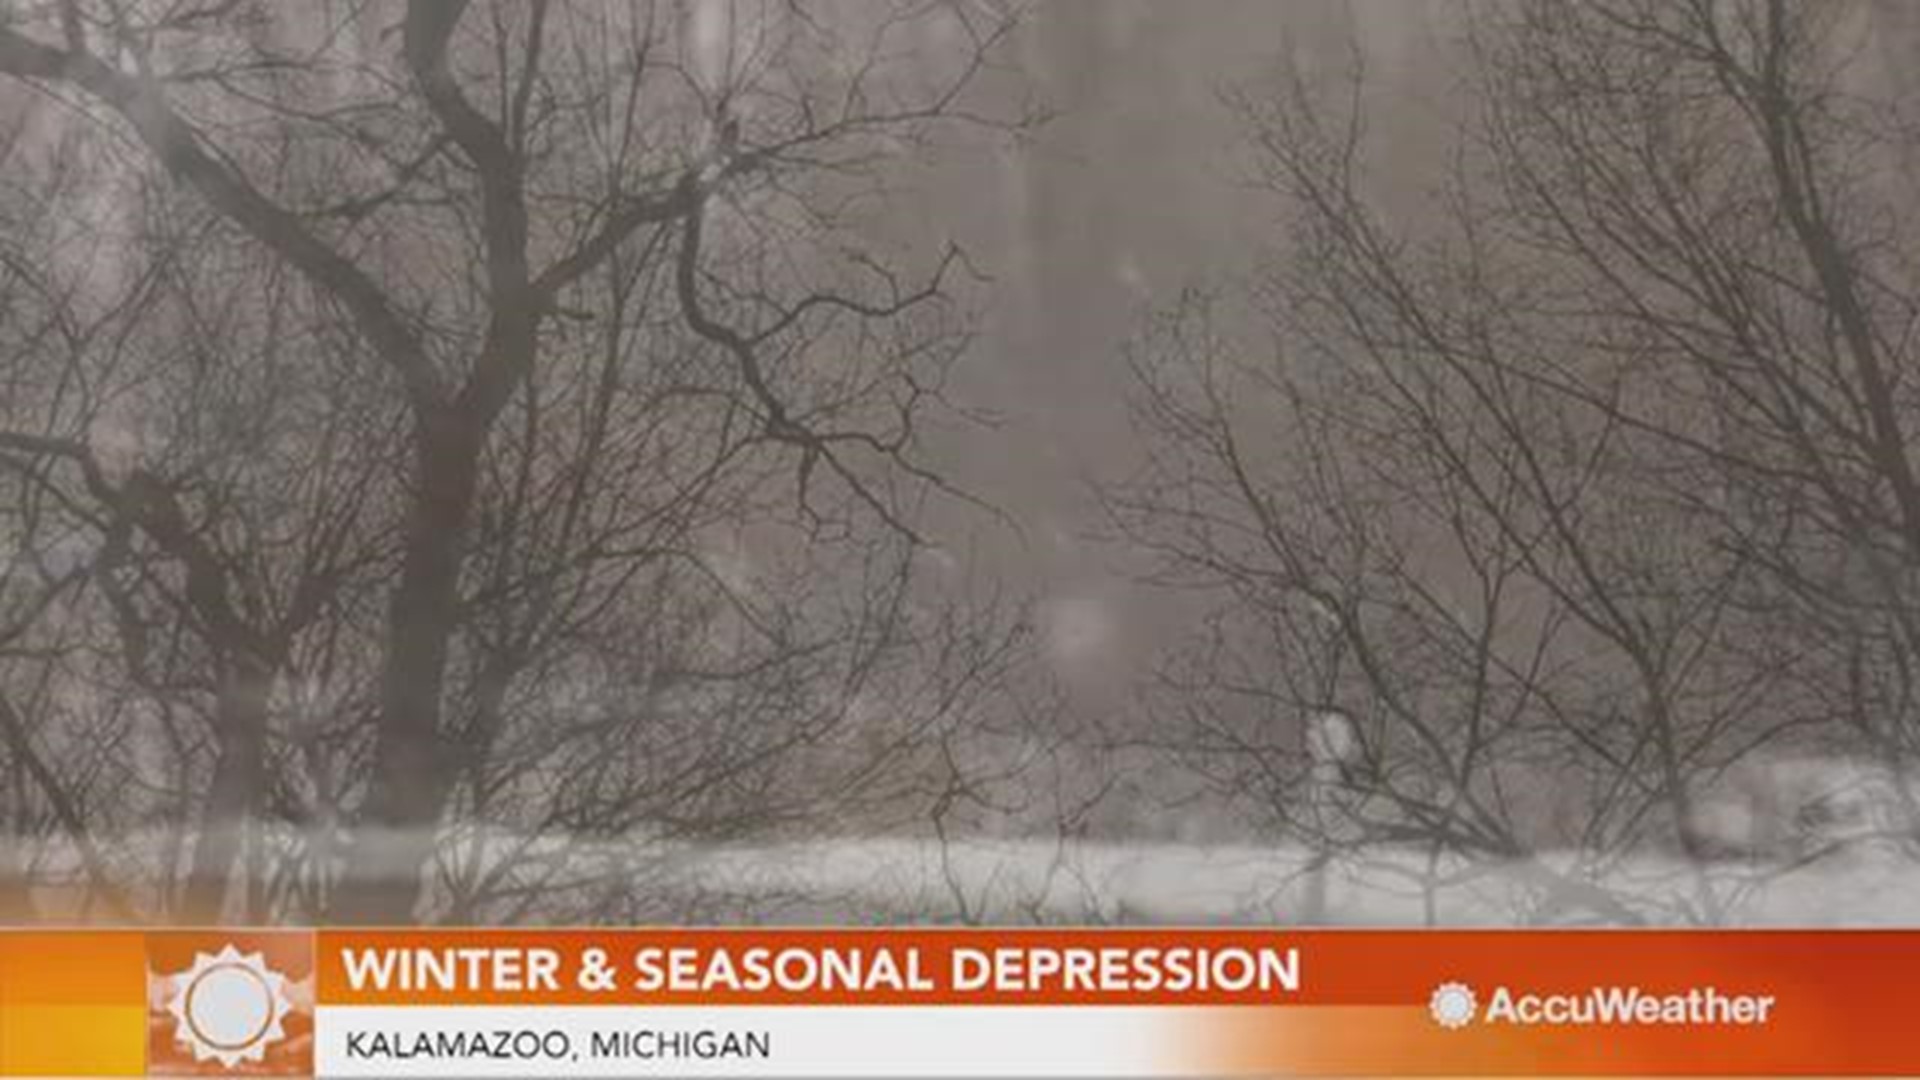 Winter months near the Great Lakes can lead to seasonal depression with limited sunshine and weather that restricts people from outdoor activities.